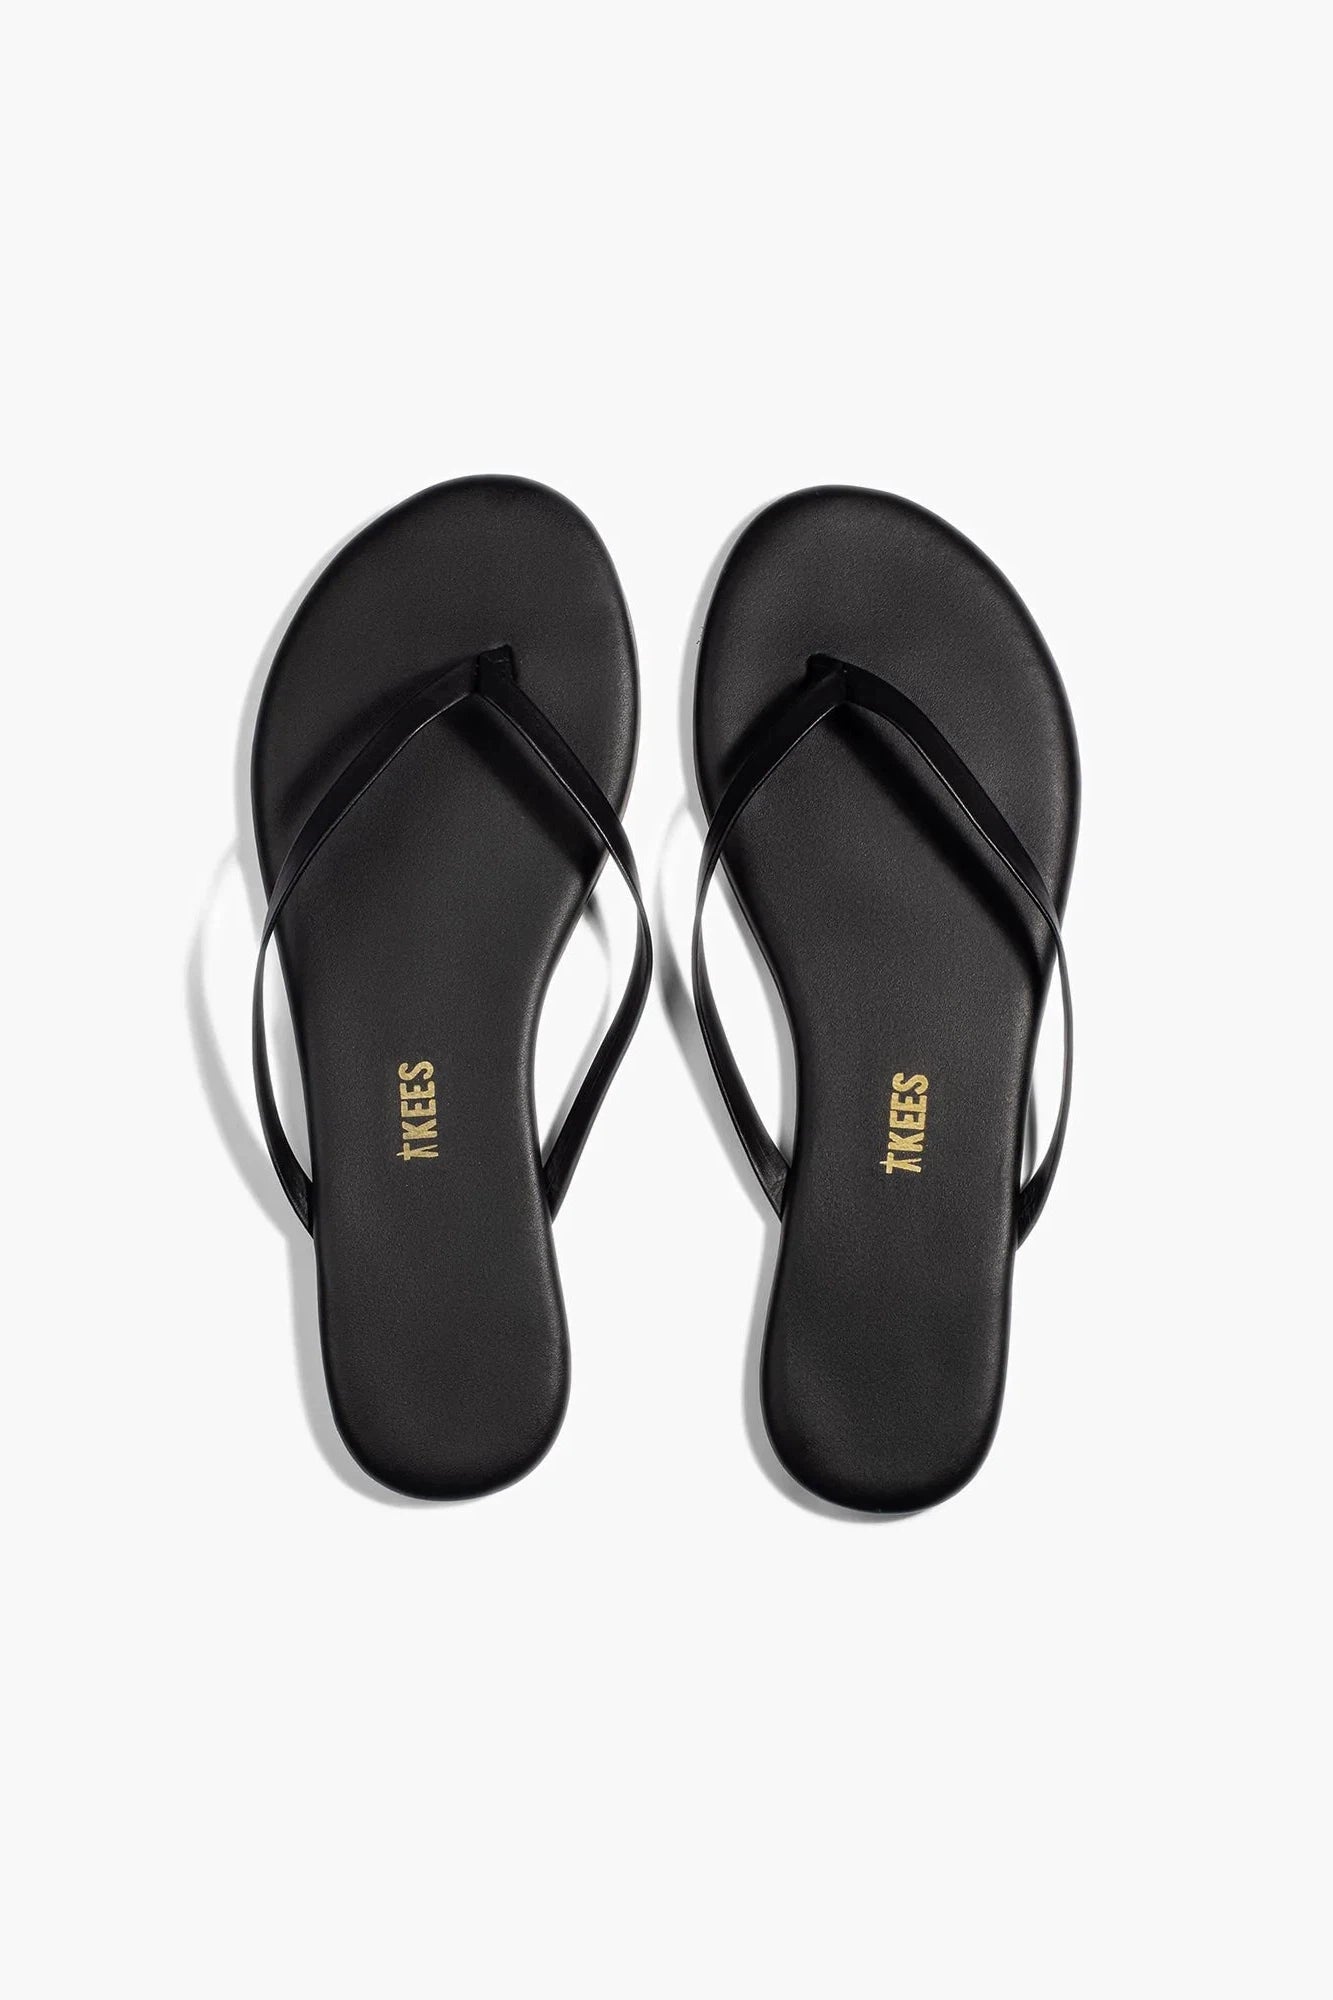 TKEES LINERS SANDAL IN SABLE